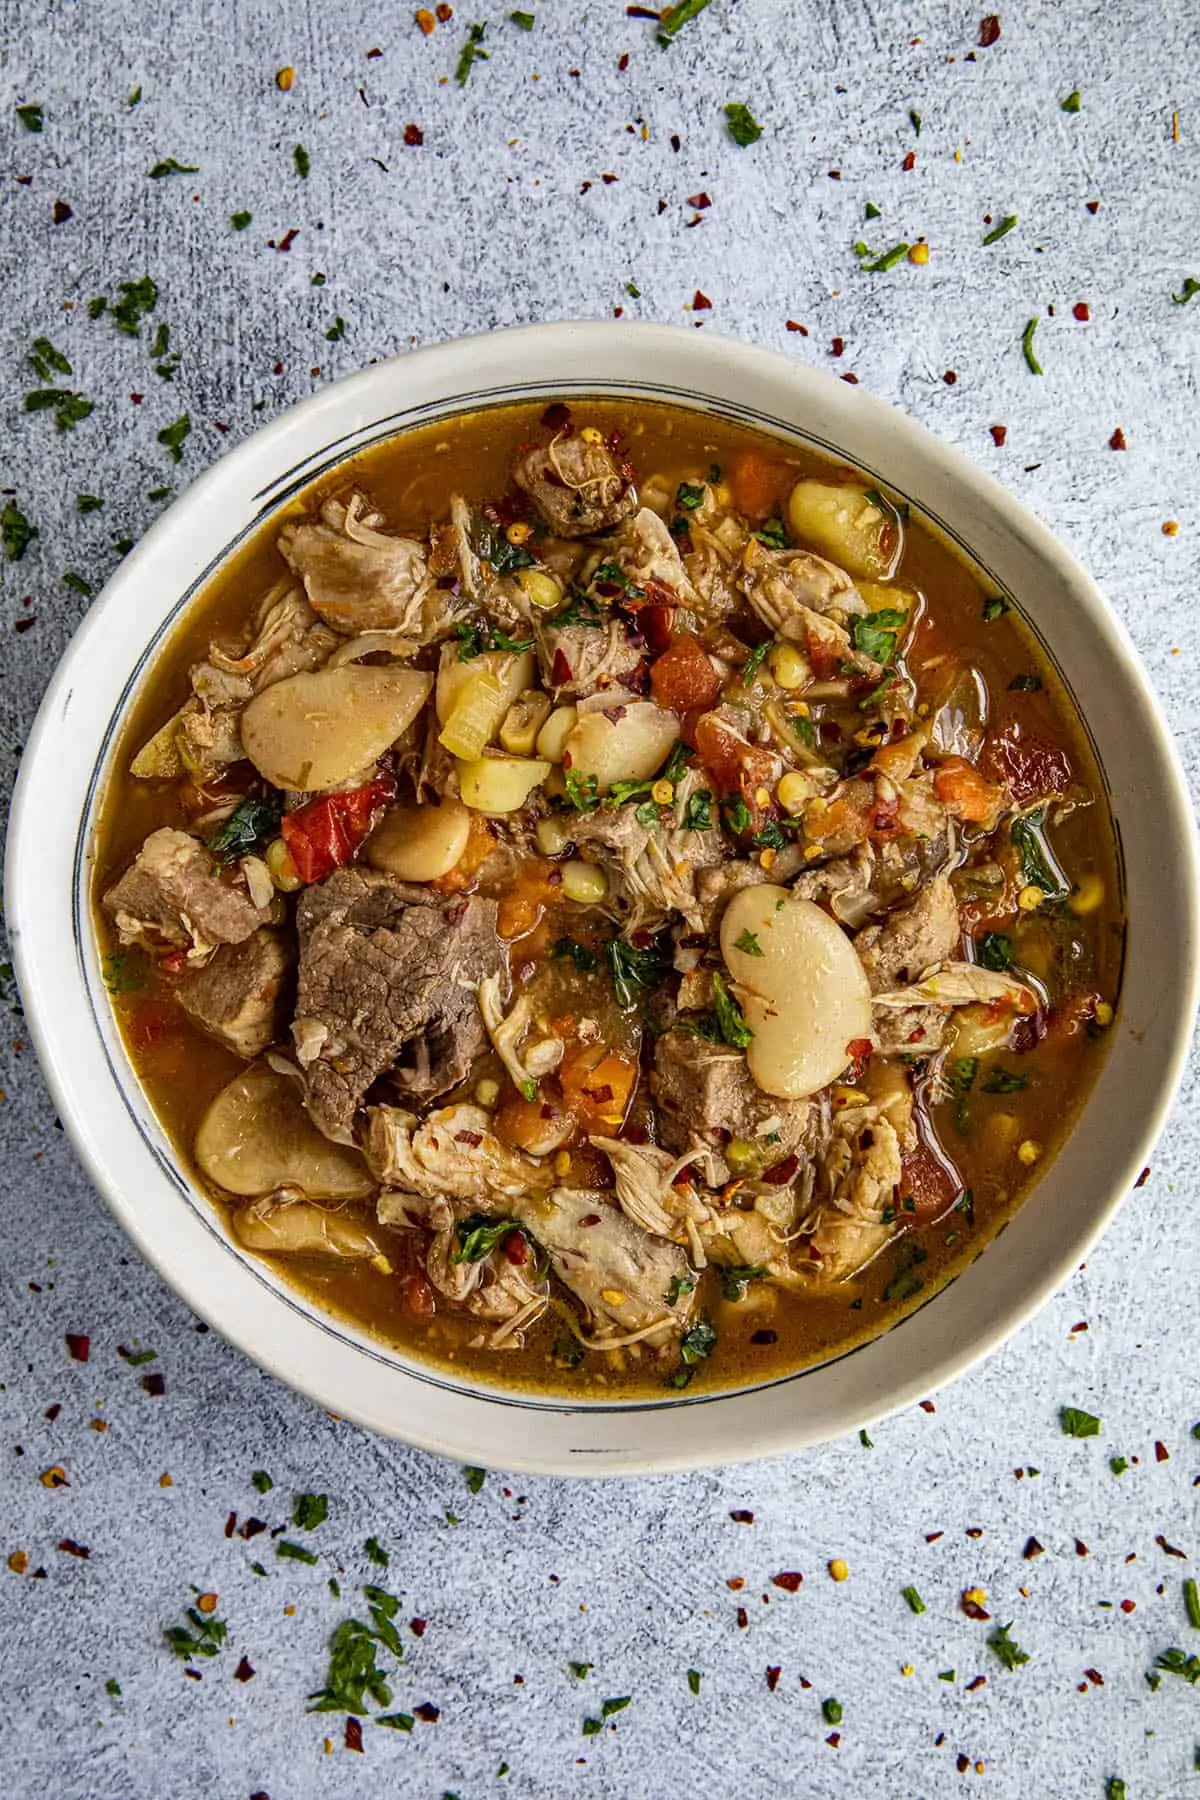 Chunky burgoo stew in a bowl with loads of meat and vegetables